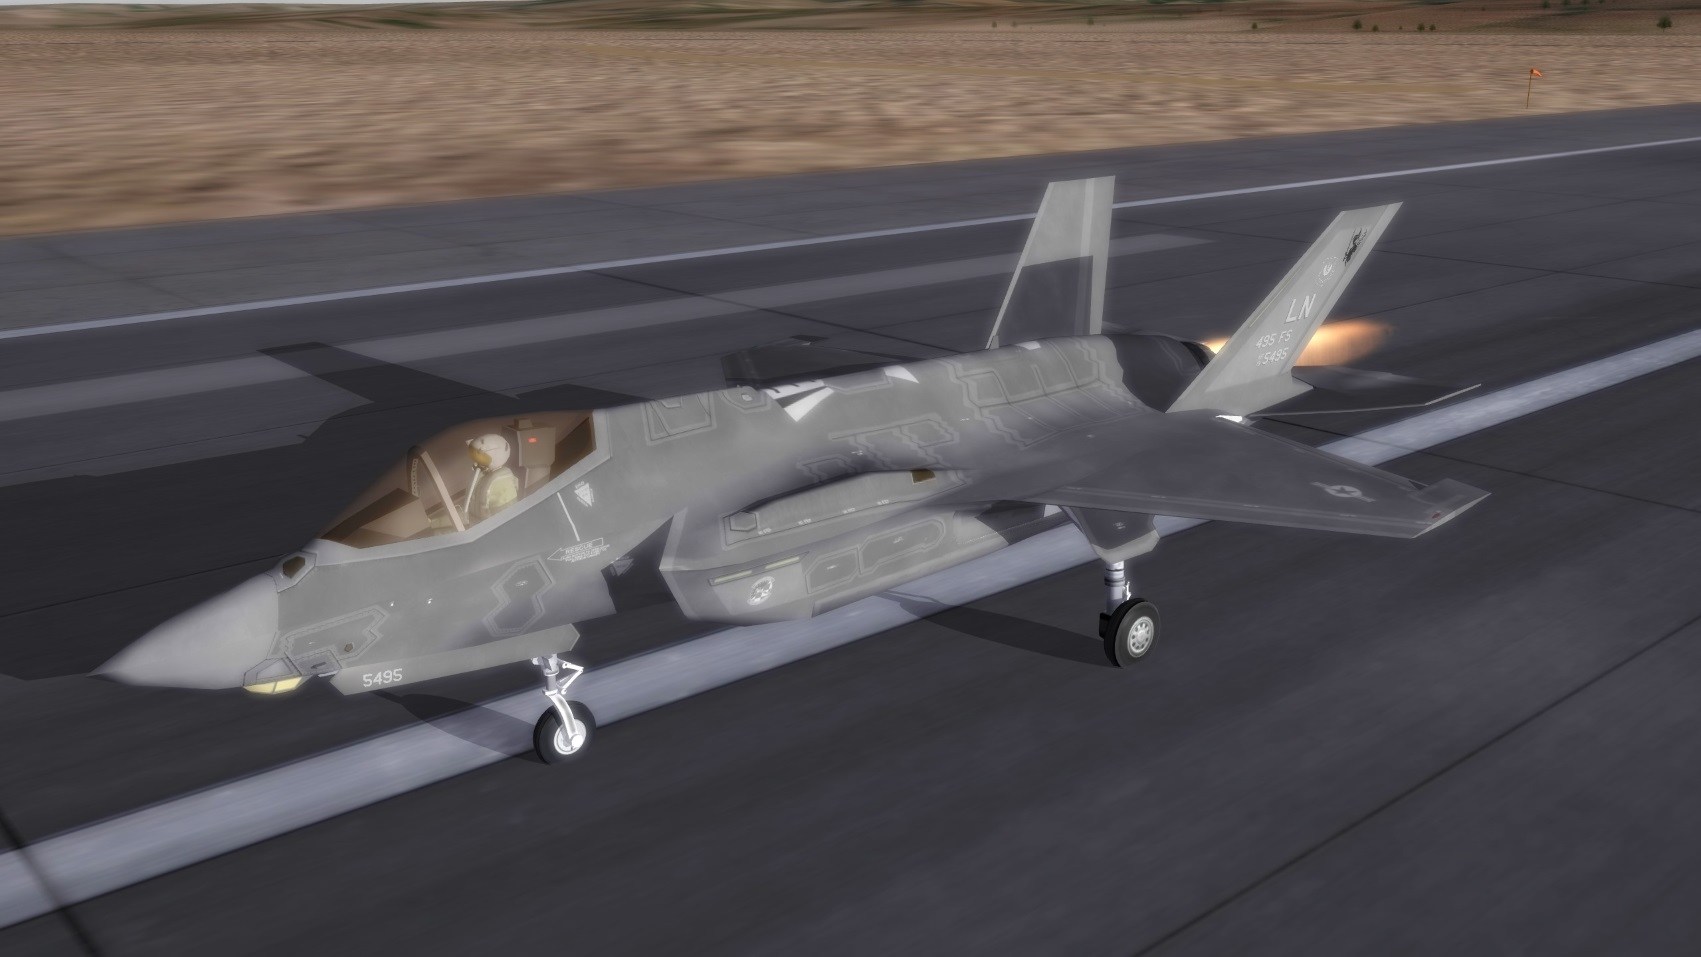 New canopy structure for the F-35A, F-35B and F-35C